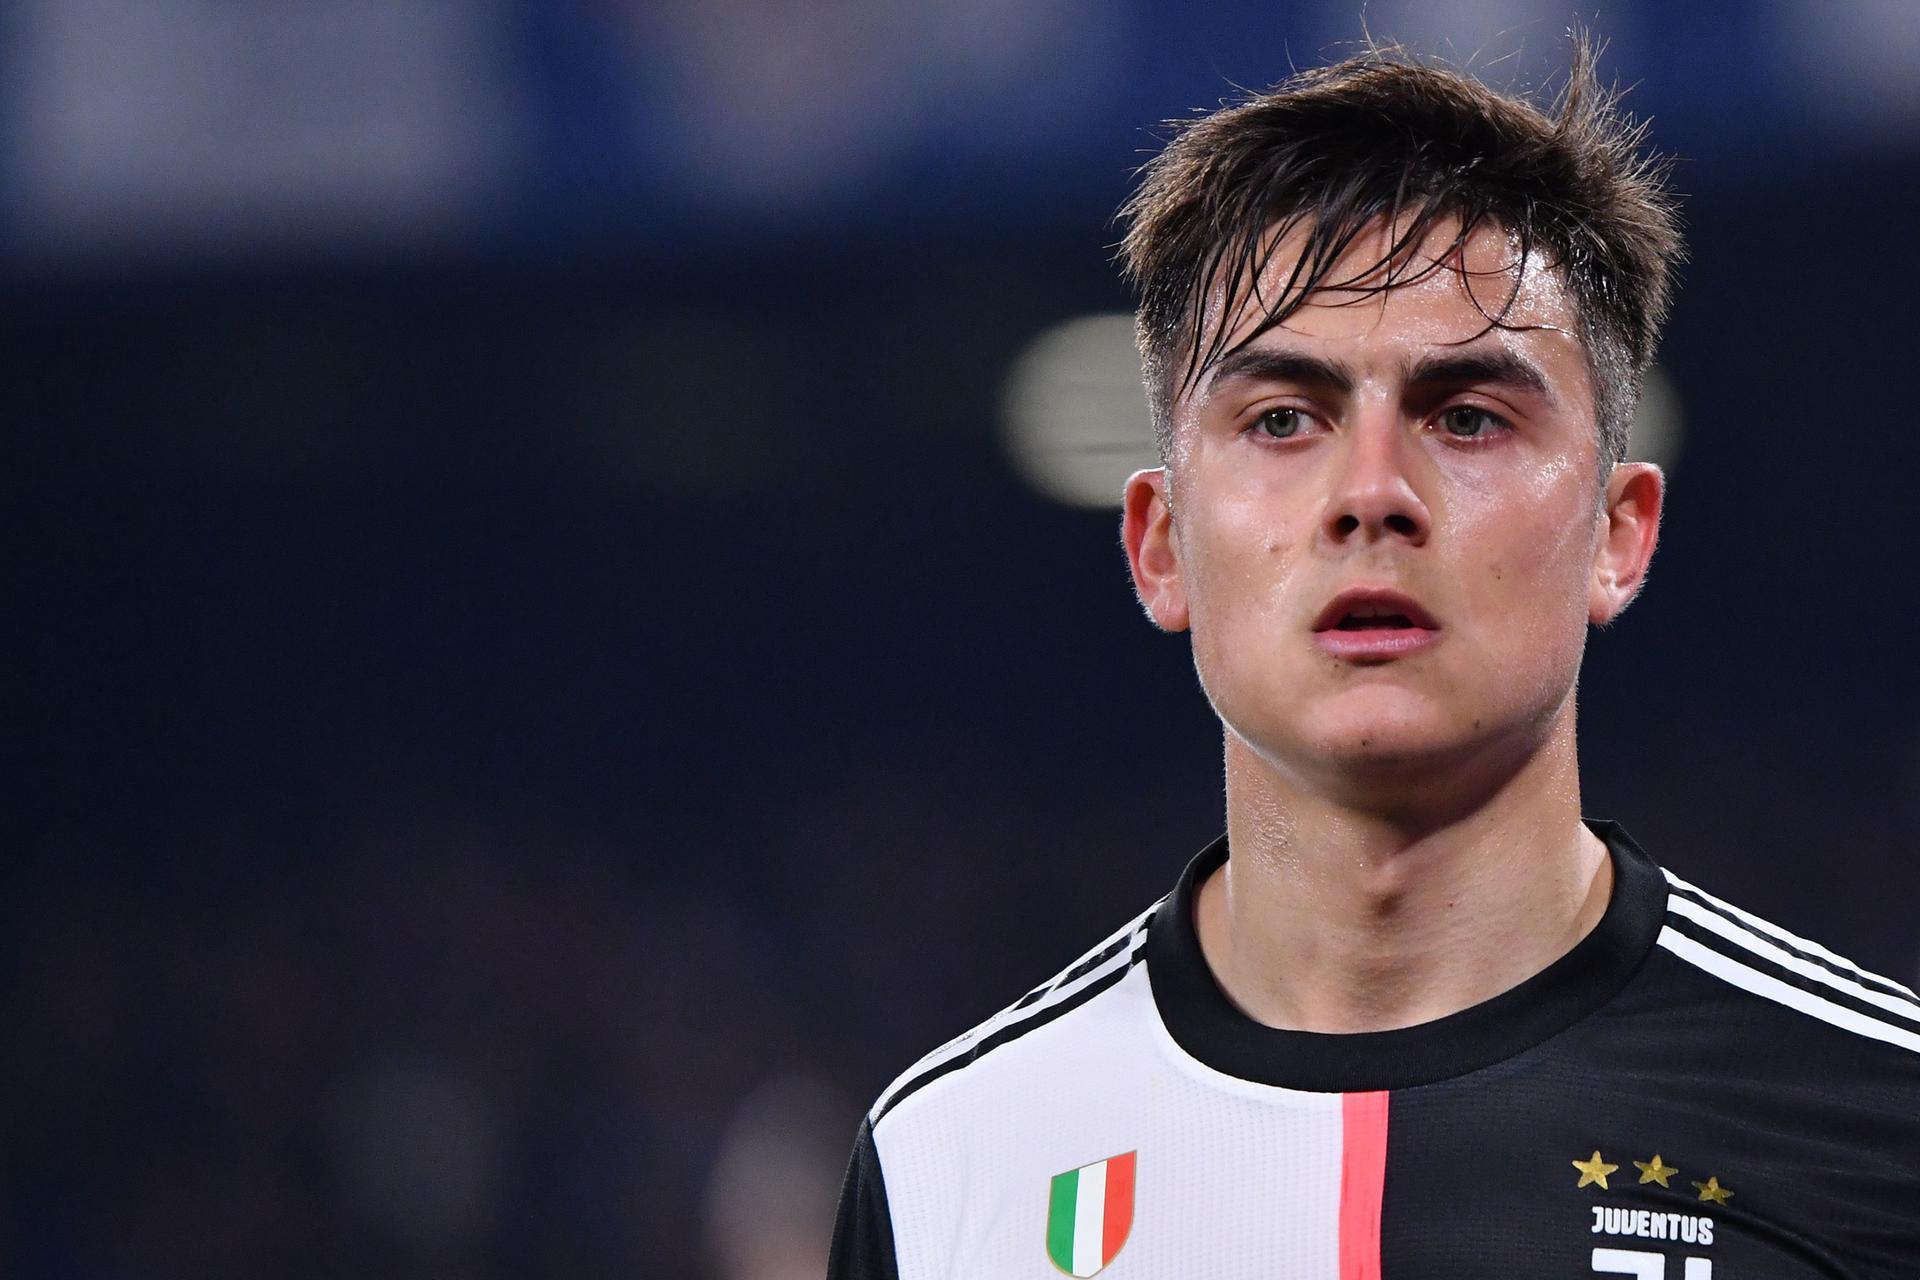 We hate you in Argentina: Juventus forward Paulo Dybala told team